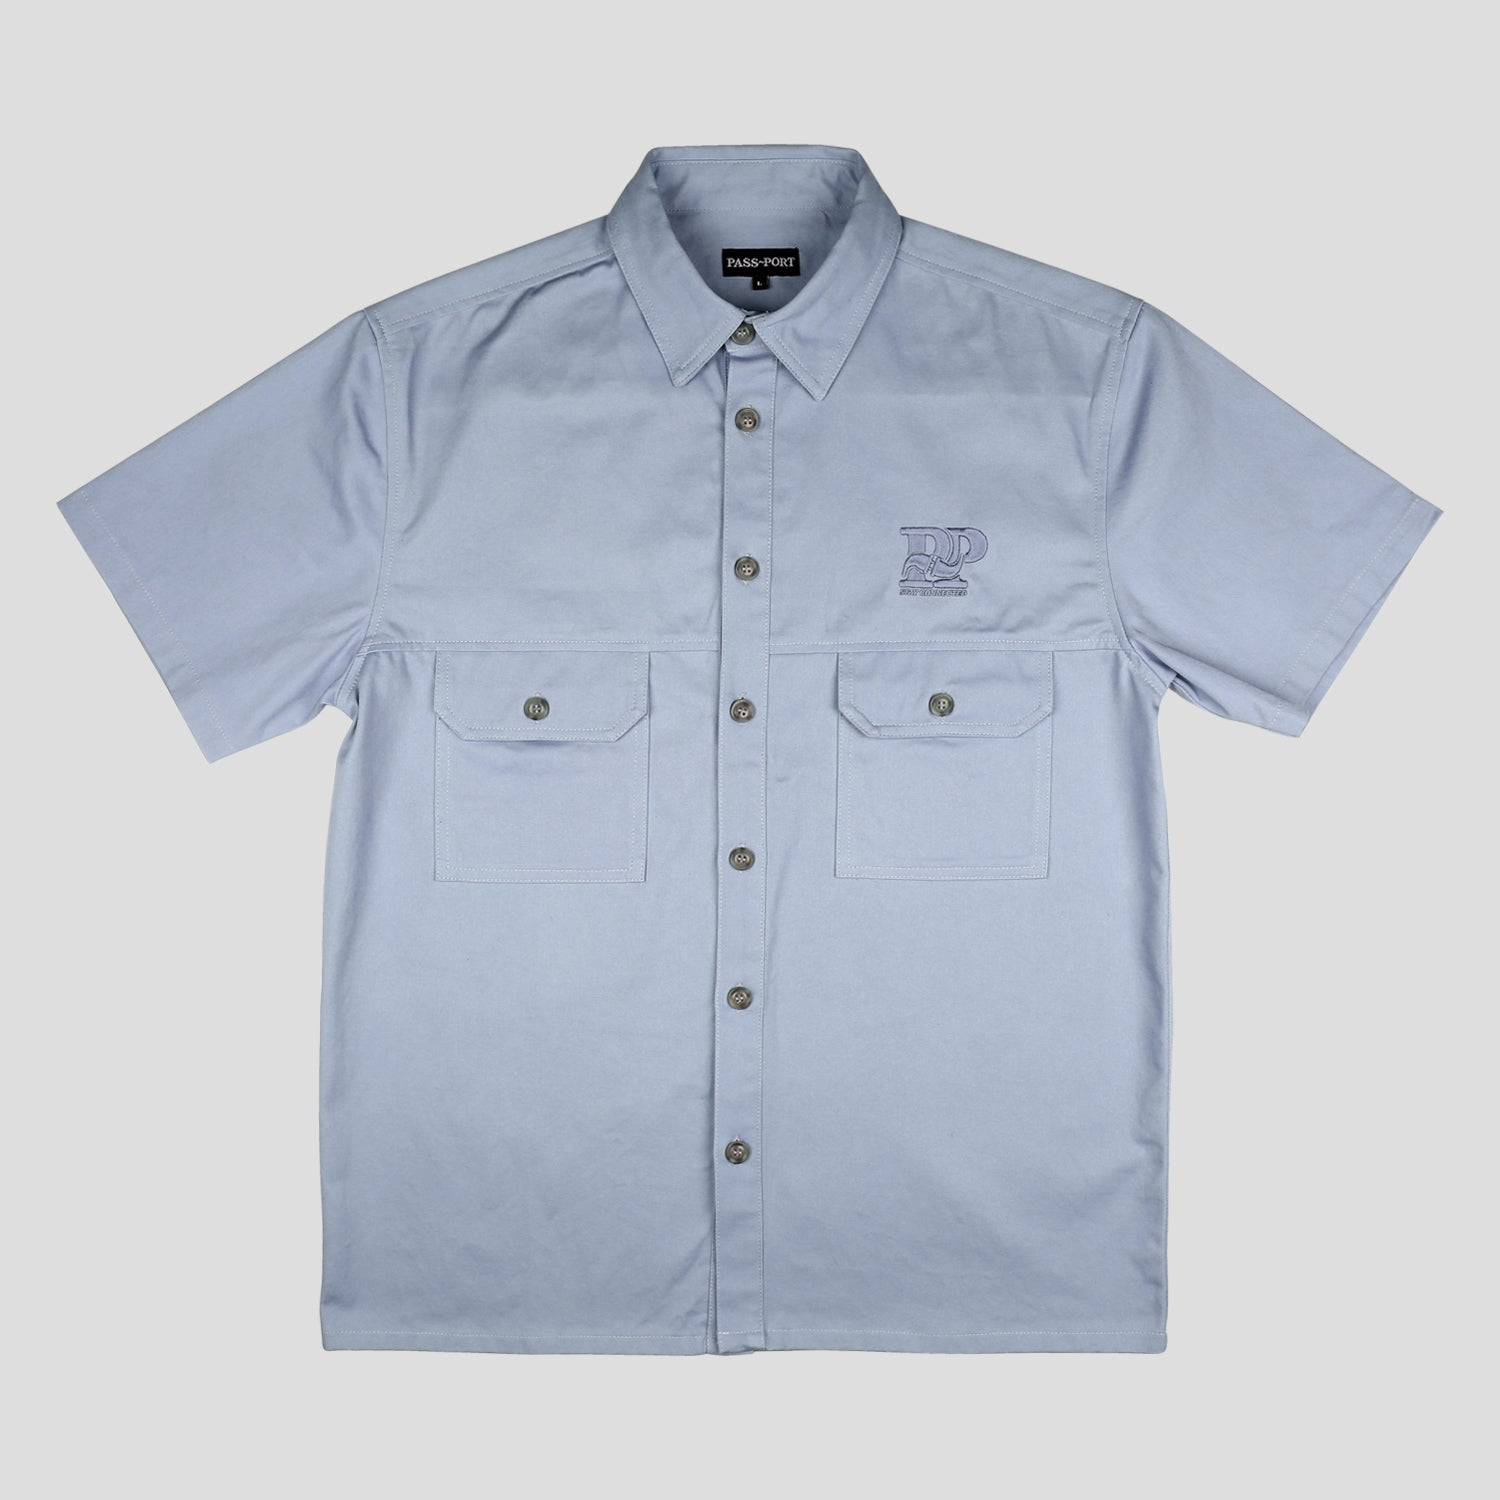 Stay Connected Sparky Shortsleeve Shirt (Slate)